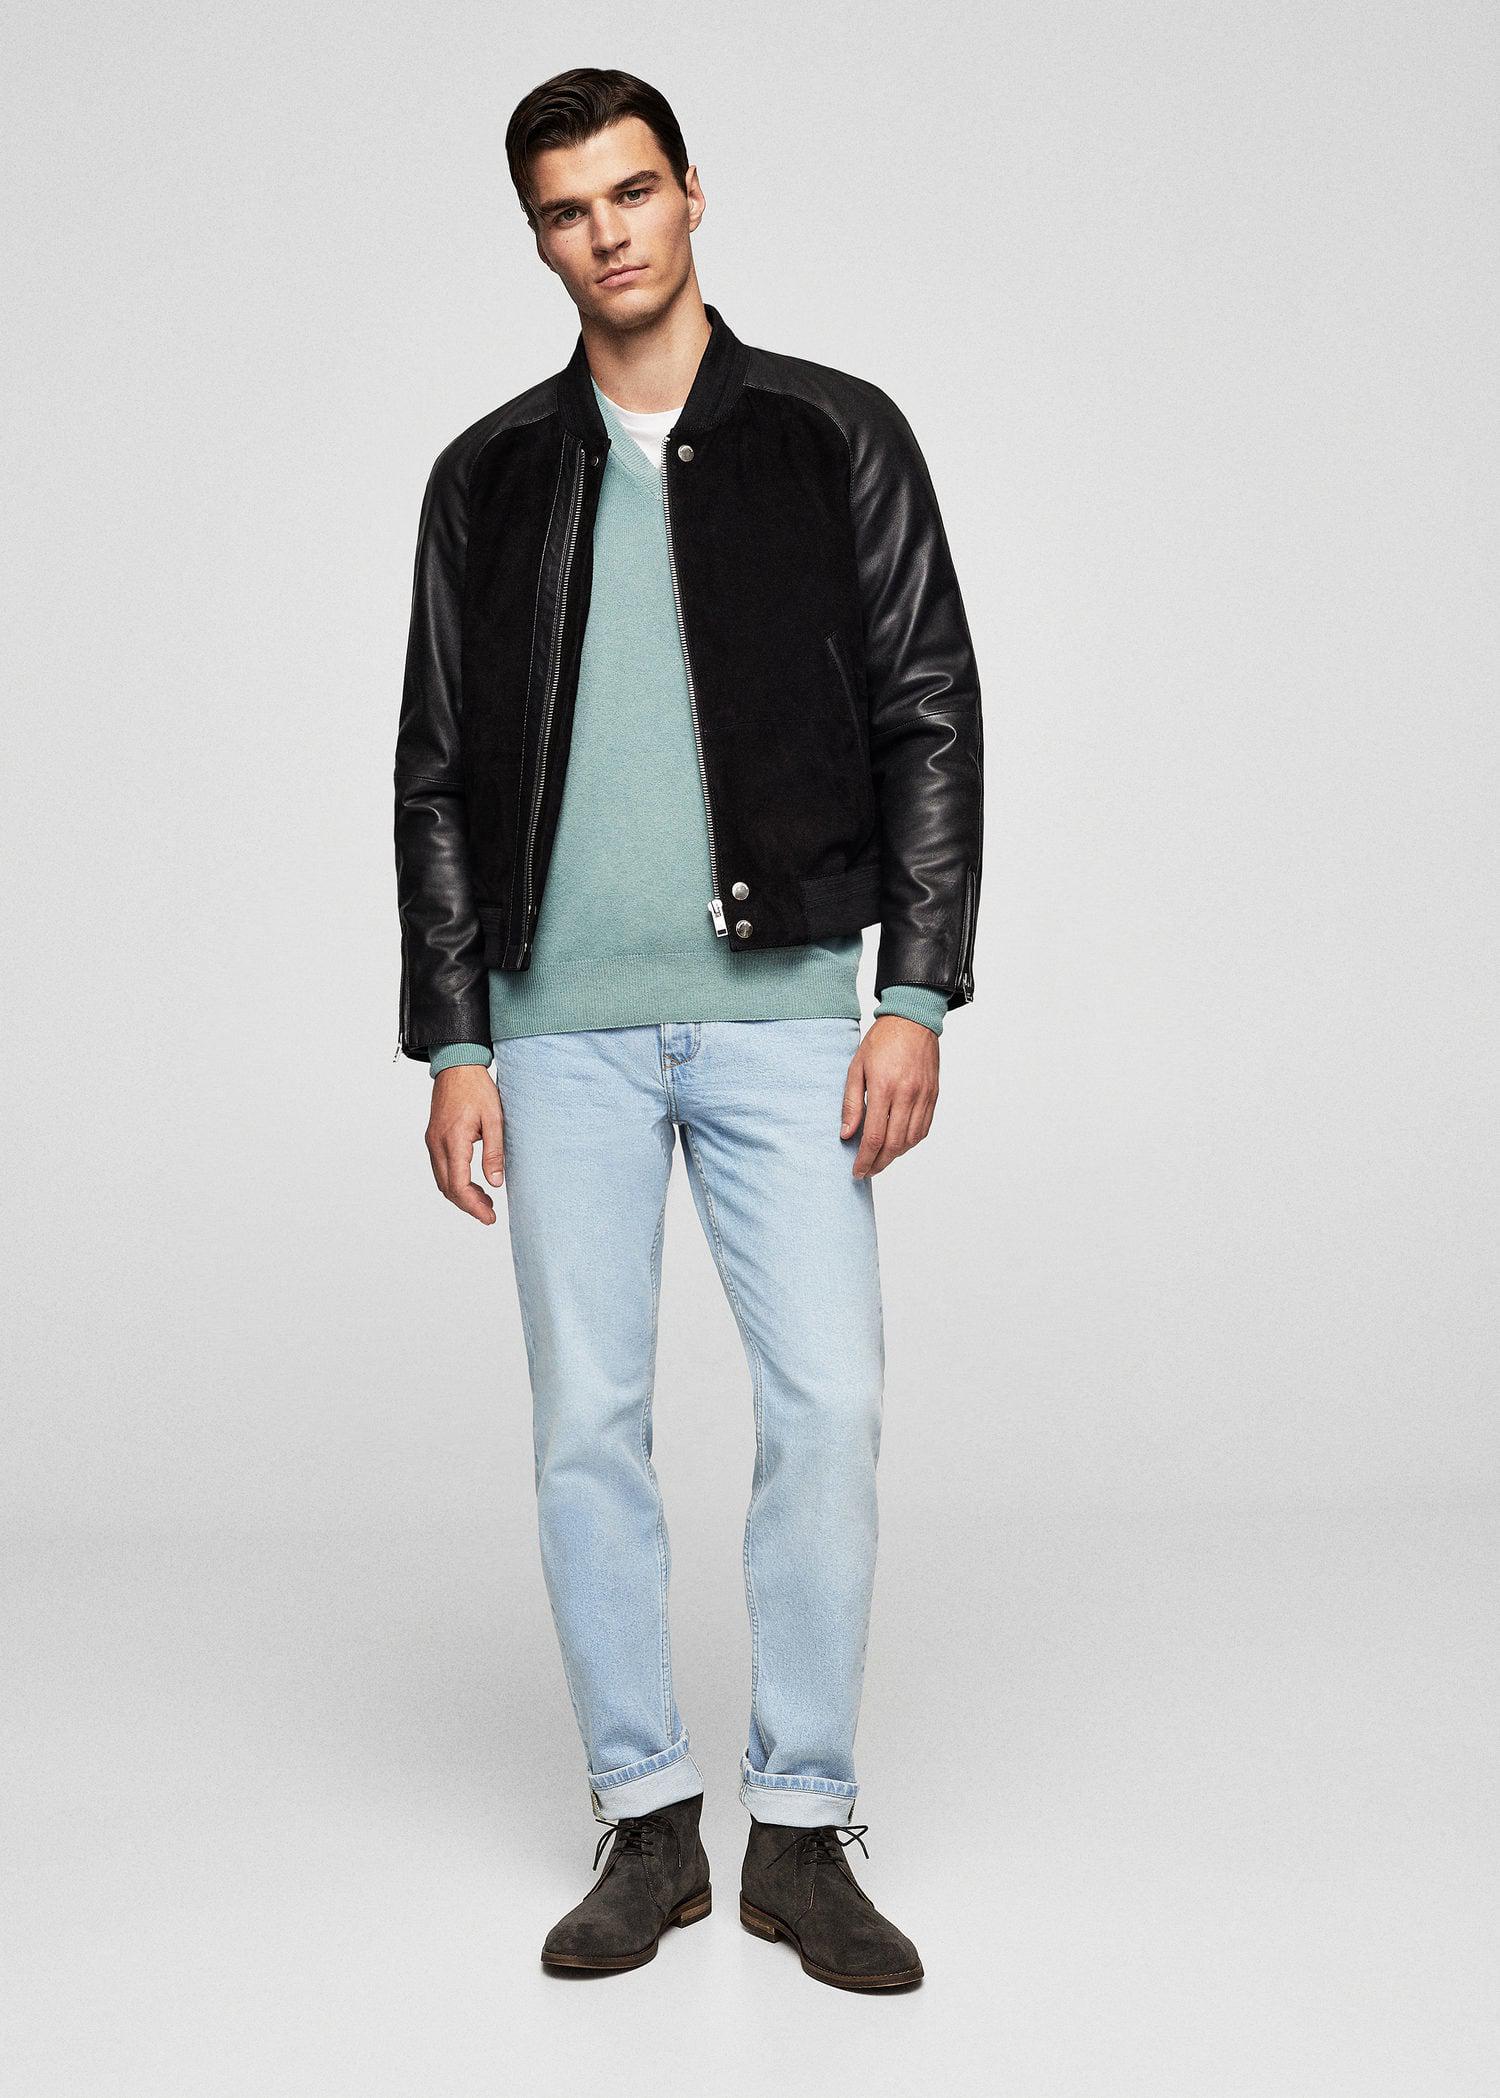 Mango Mixed Leather Bomber Jacket in Black for Men - Lyst